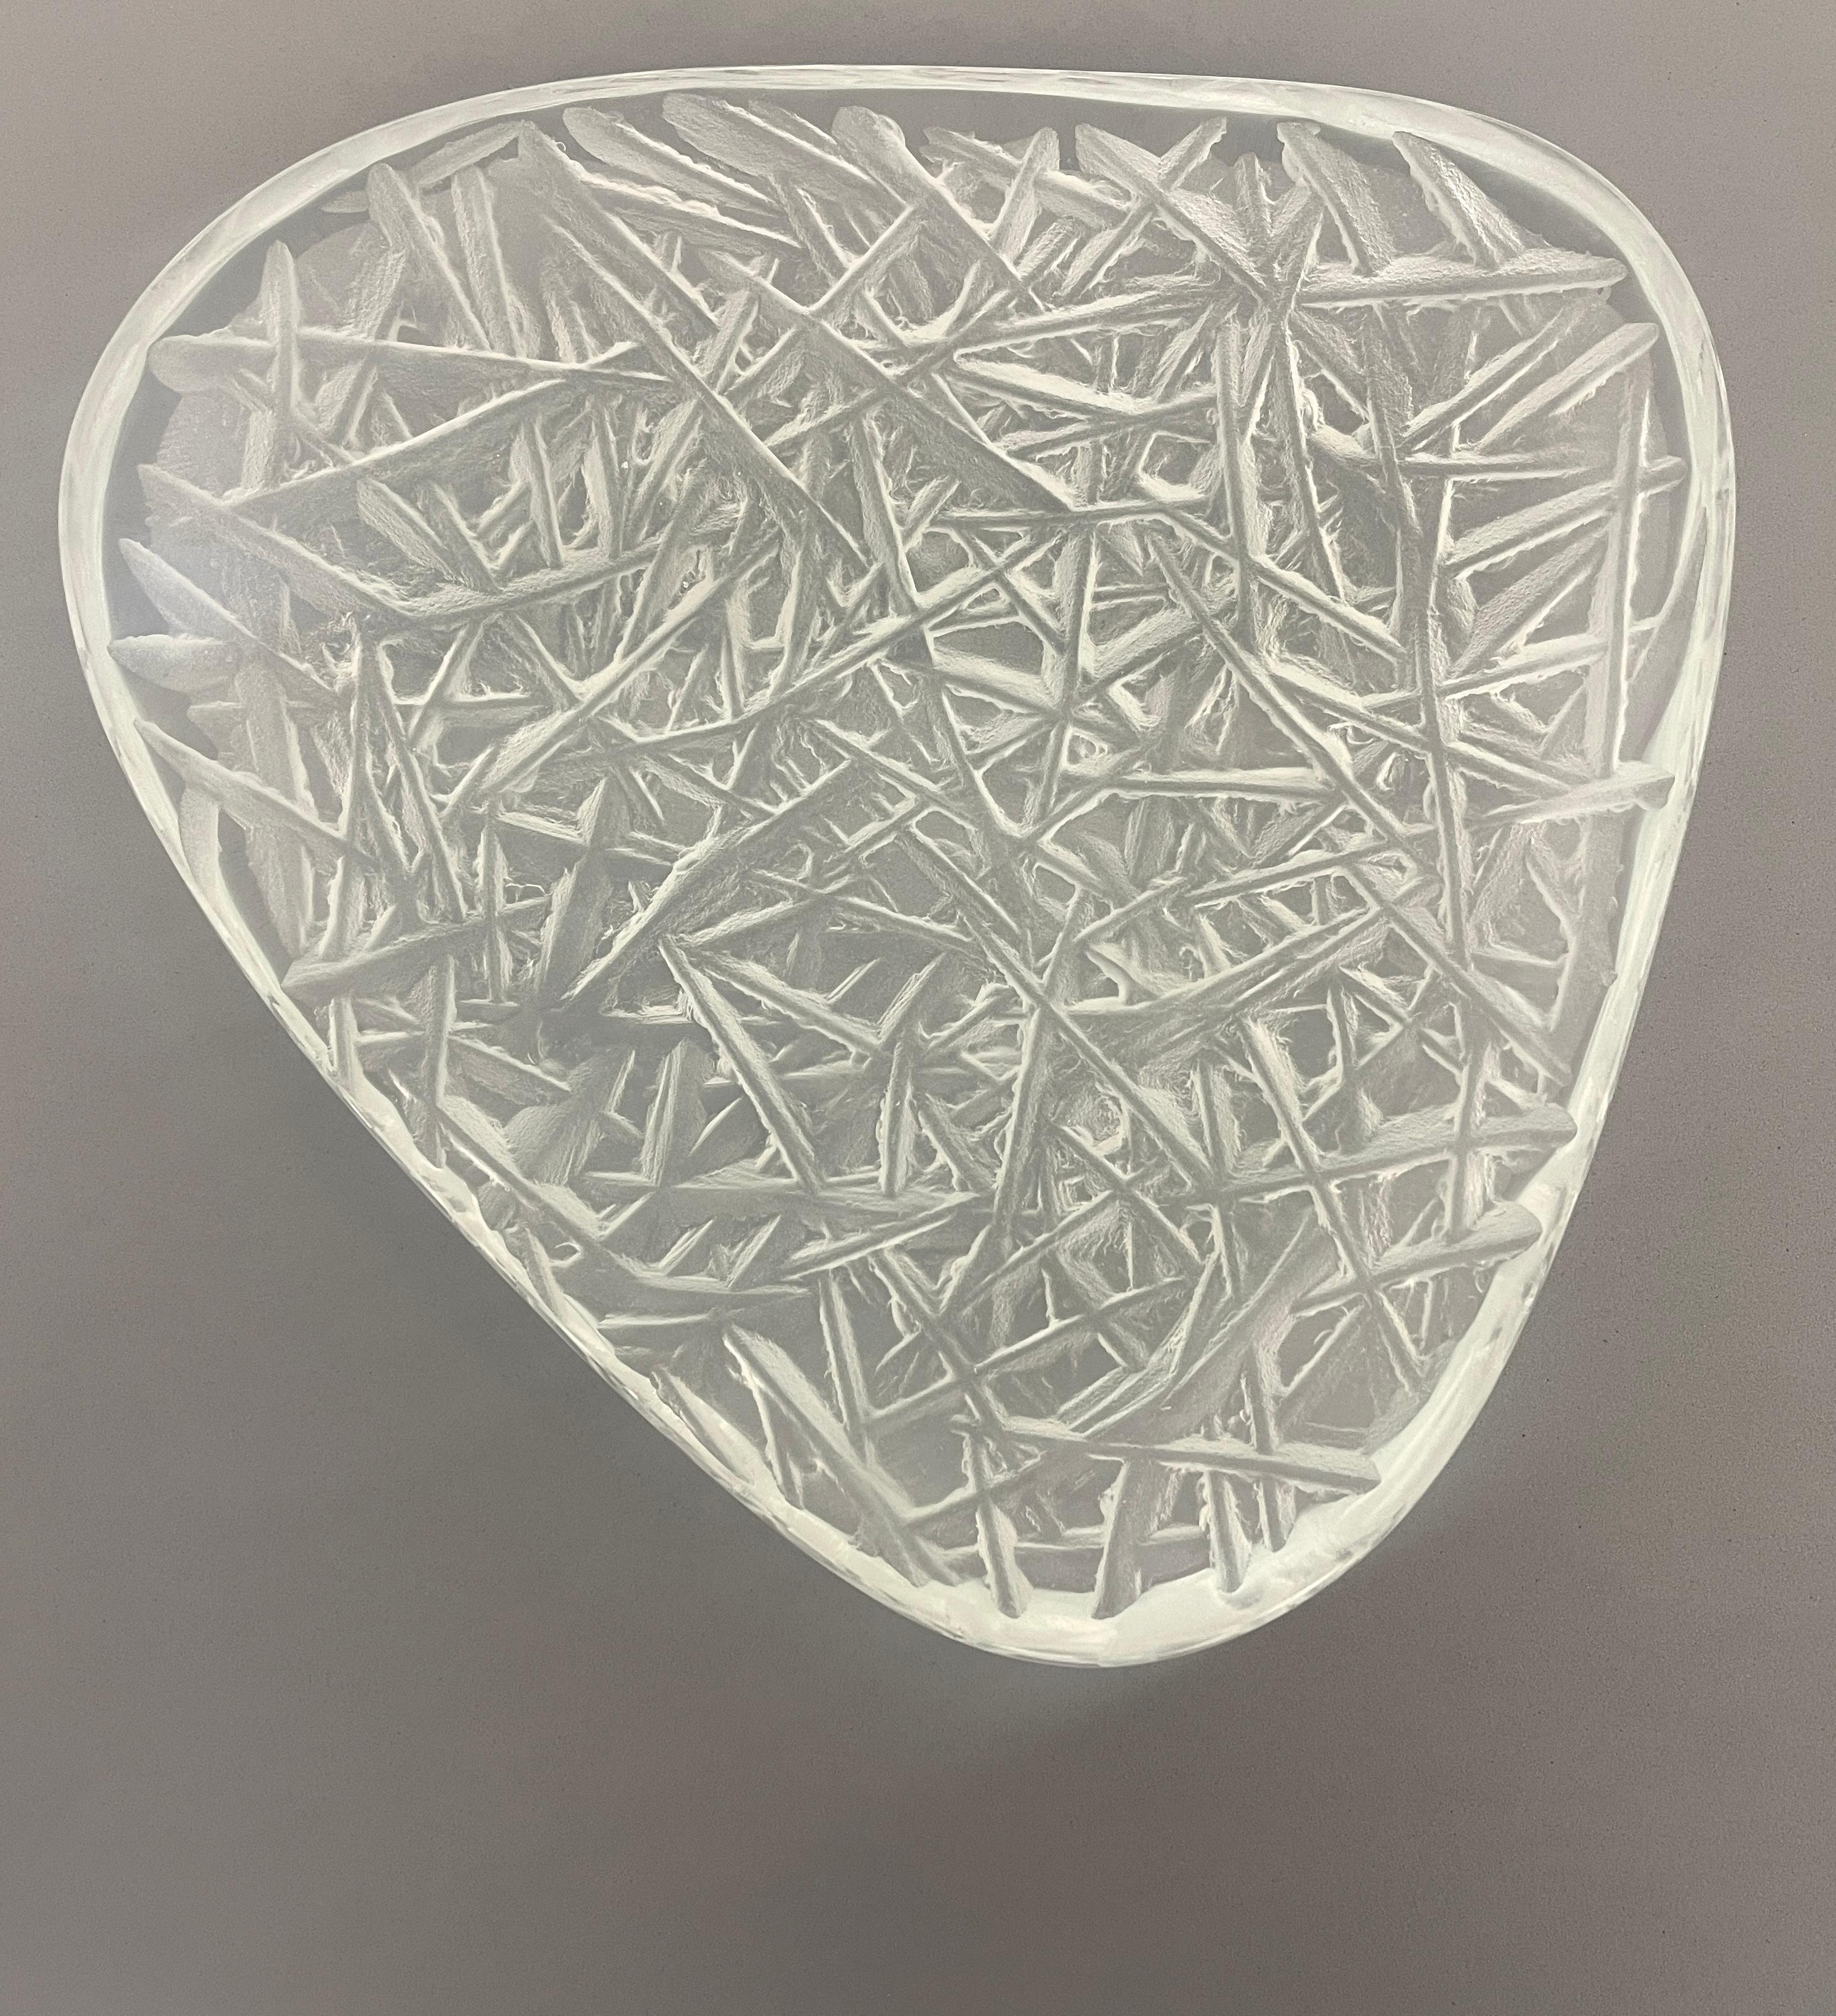 Unique Contemporary Hand-engraved Crystal Bowl by Ghiró Studio For Sale 1